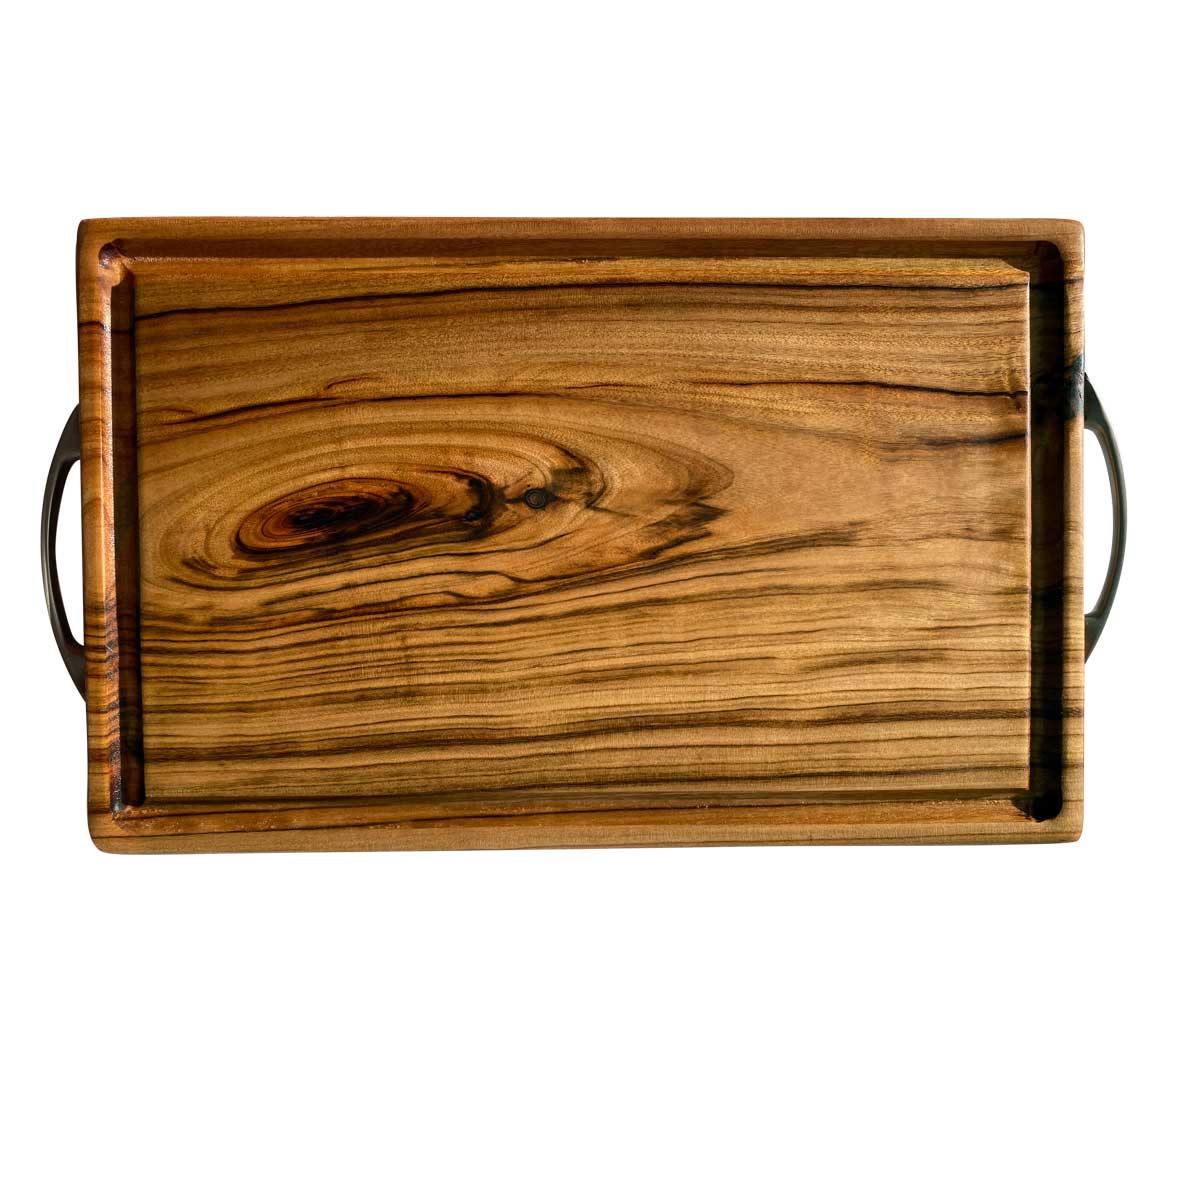 Nature's Boards large carving board with a deep groove or juice rail and stainless steel handles handmade from camphor laurel timber.